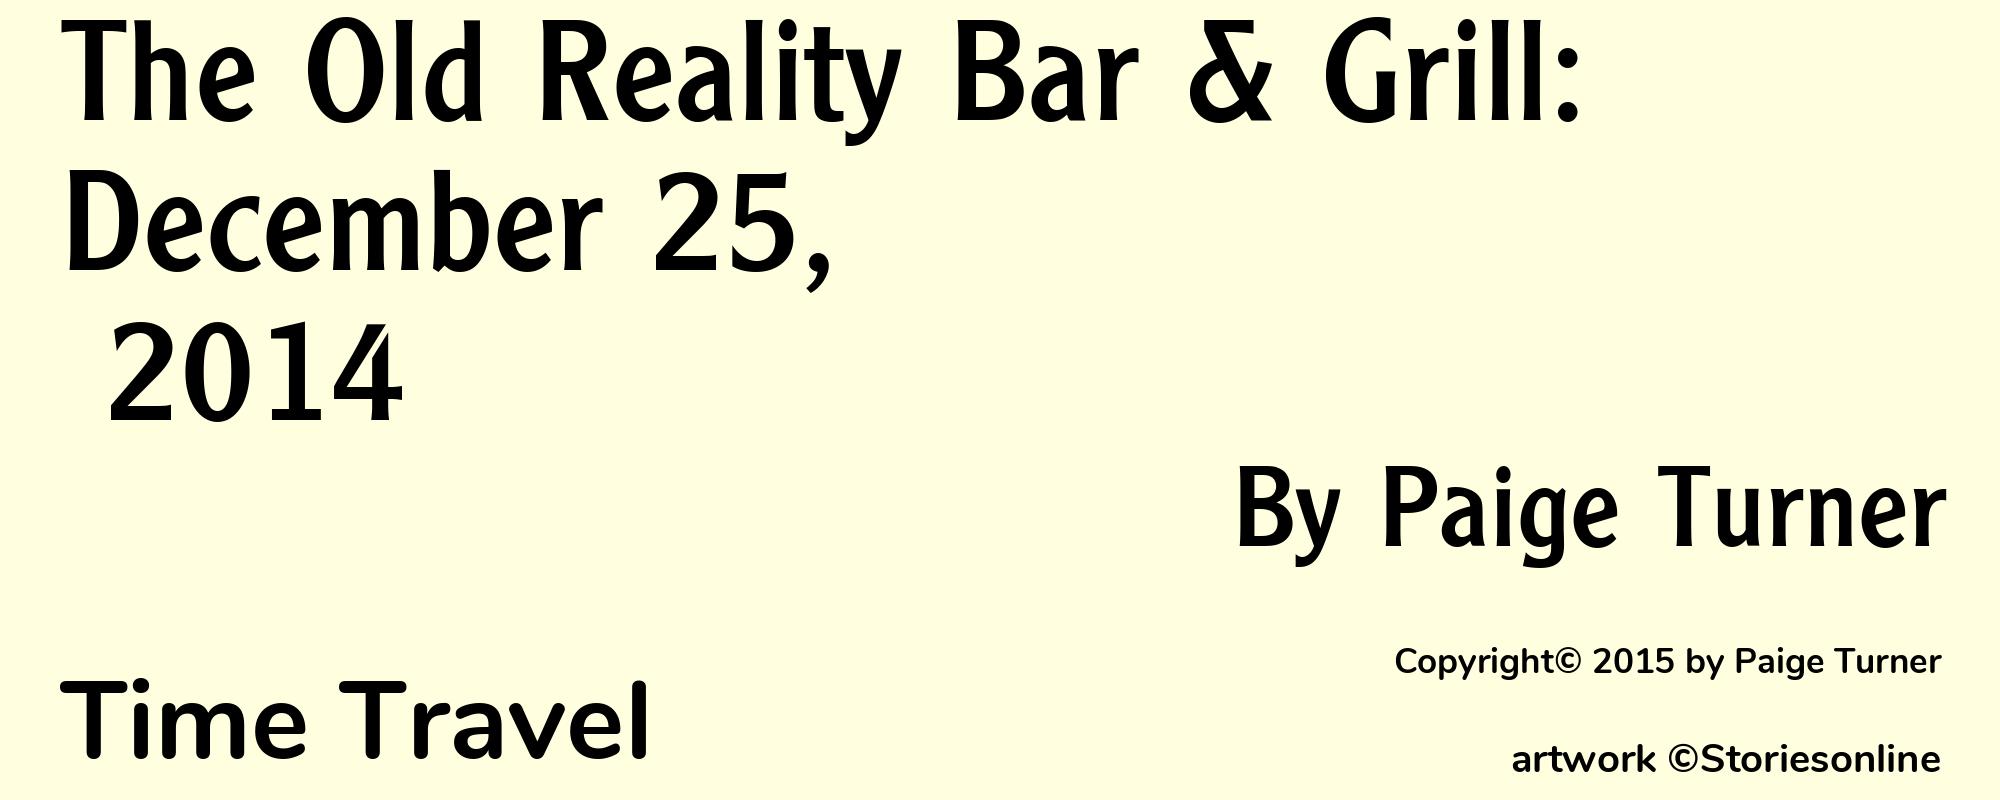 The Old Reality Bar & Grill: December 25, 2014 - Cover